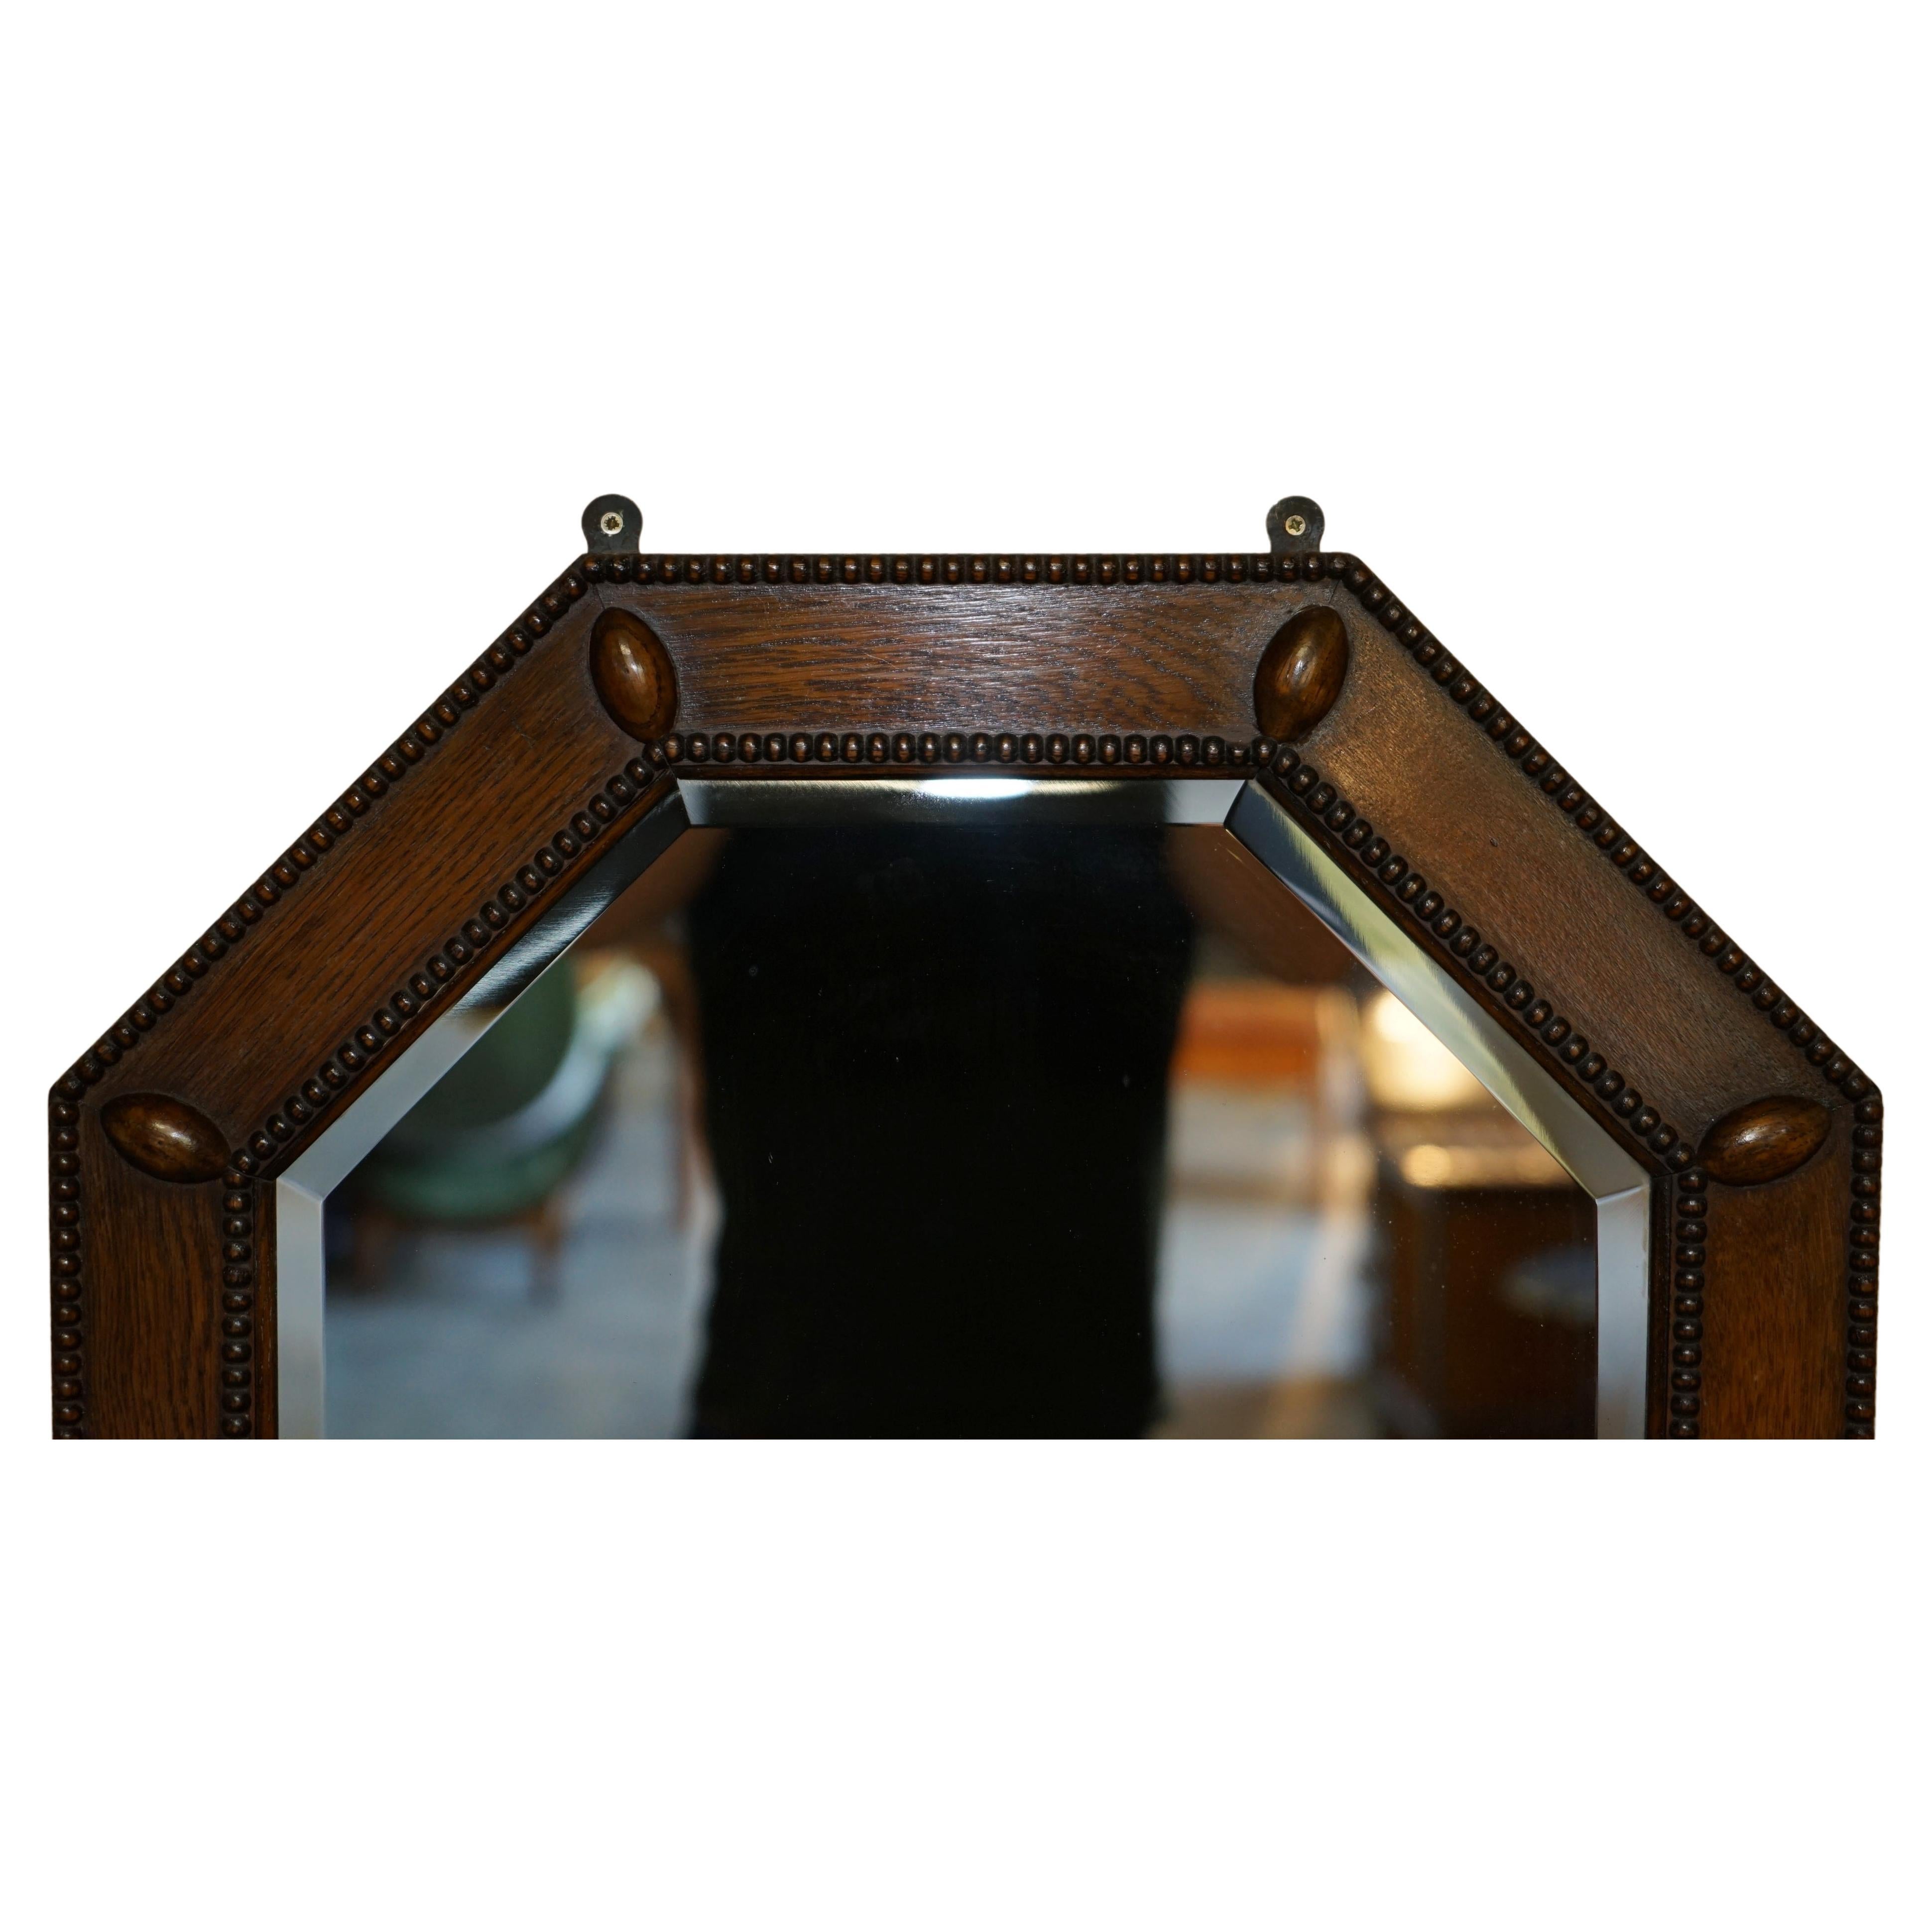 Royal House Antiques

Royal House Antiques is delighted to offer for sale this lovely circa 1900 hand made in Scotland solid oak wall mirror with period bevelled glass 

A very good looking and decorative mirror, it has Scotland's famous Bobbin